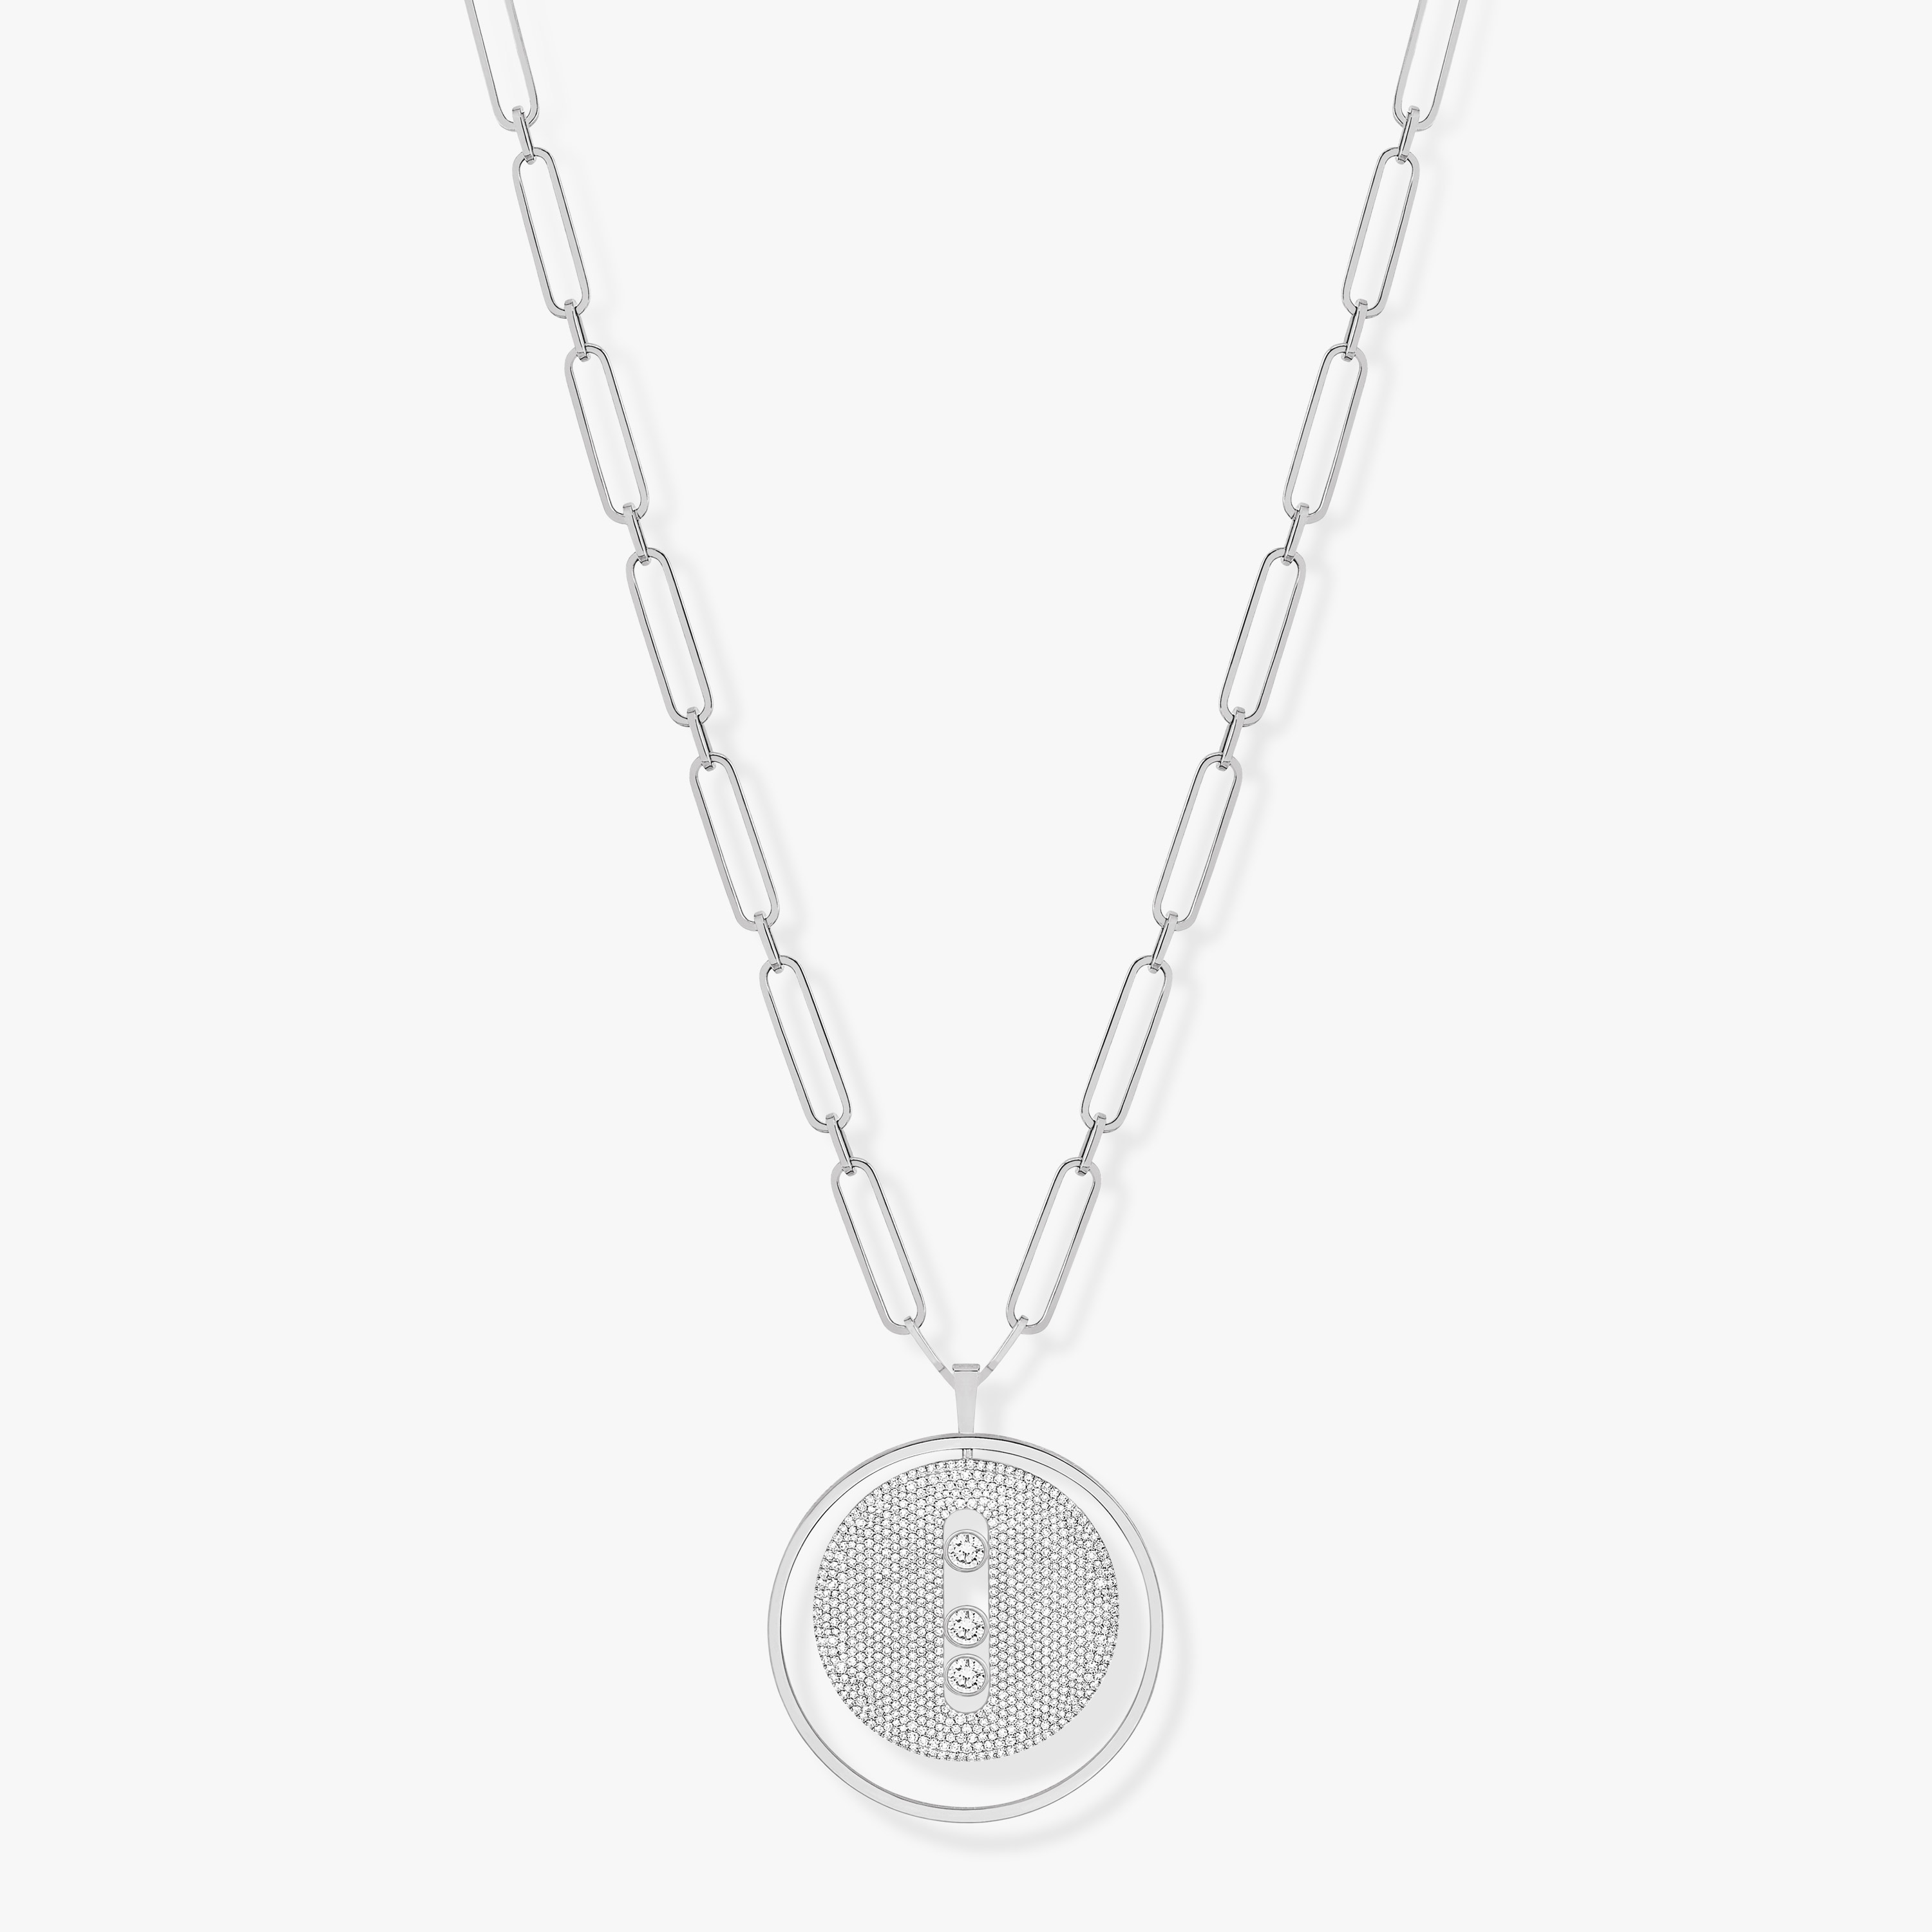 Necklace For Her White Gold Diamond Lucky Move Long Necklace Pavé LM 10127-WG